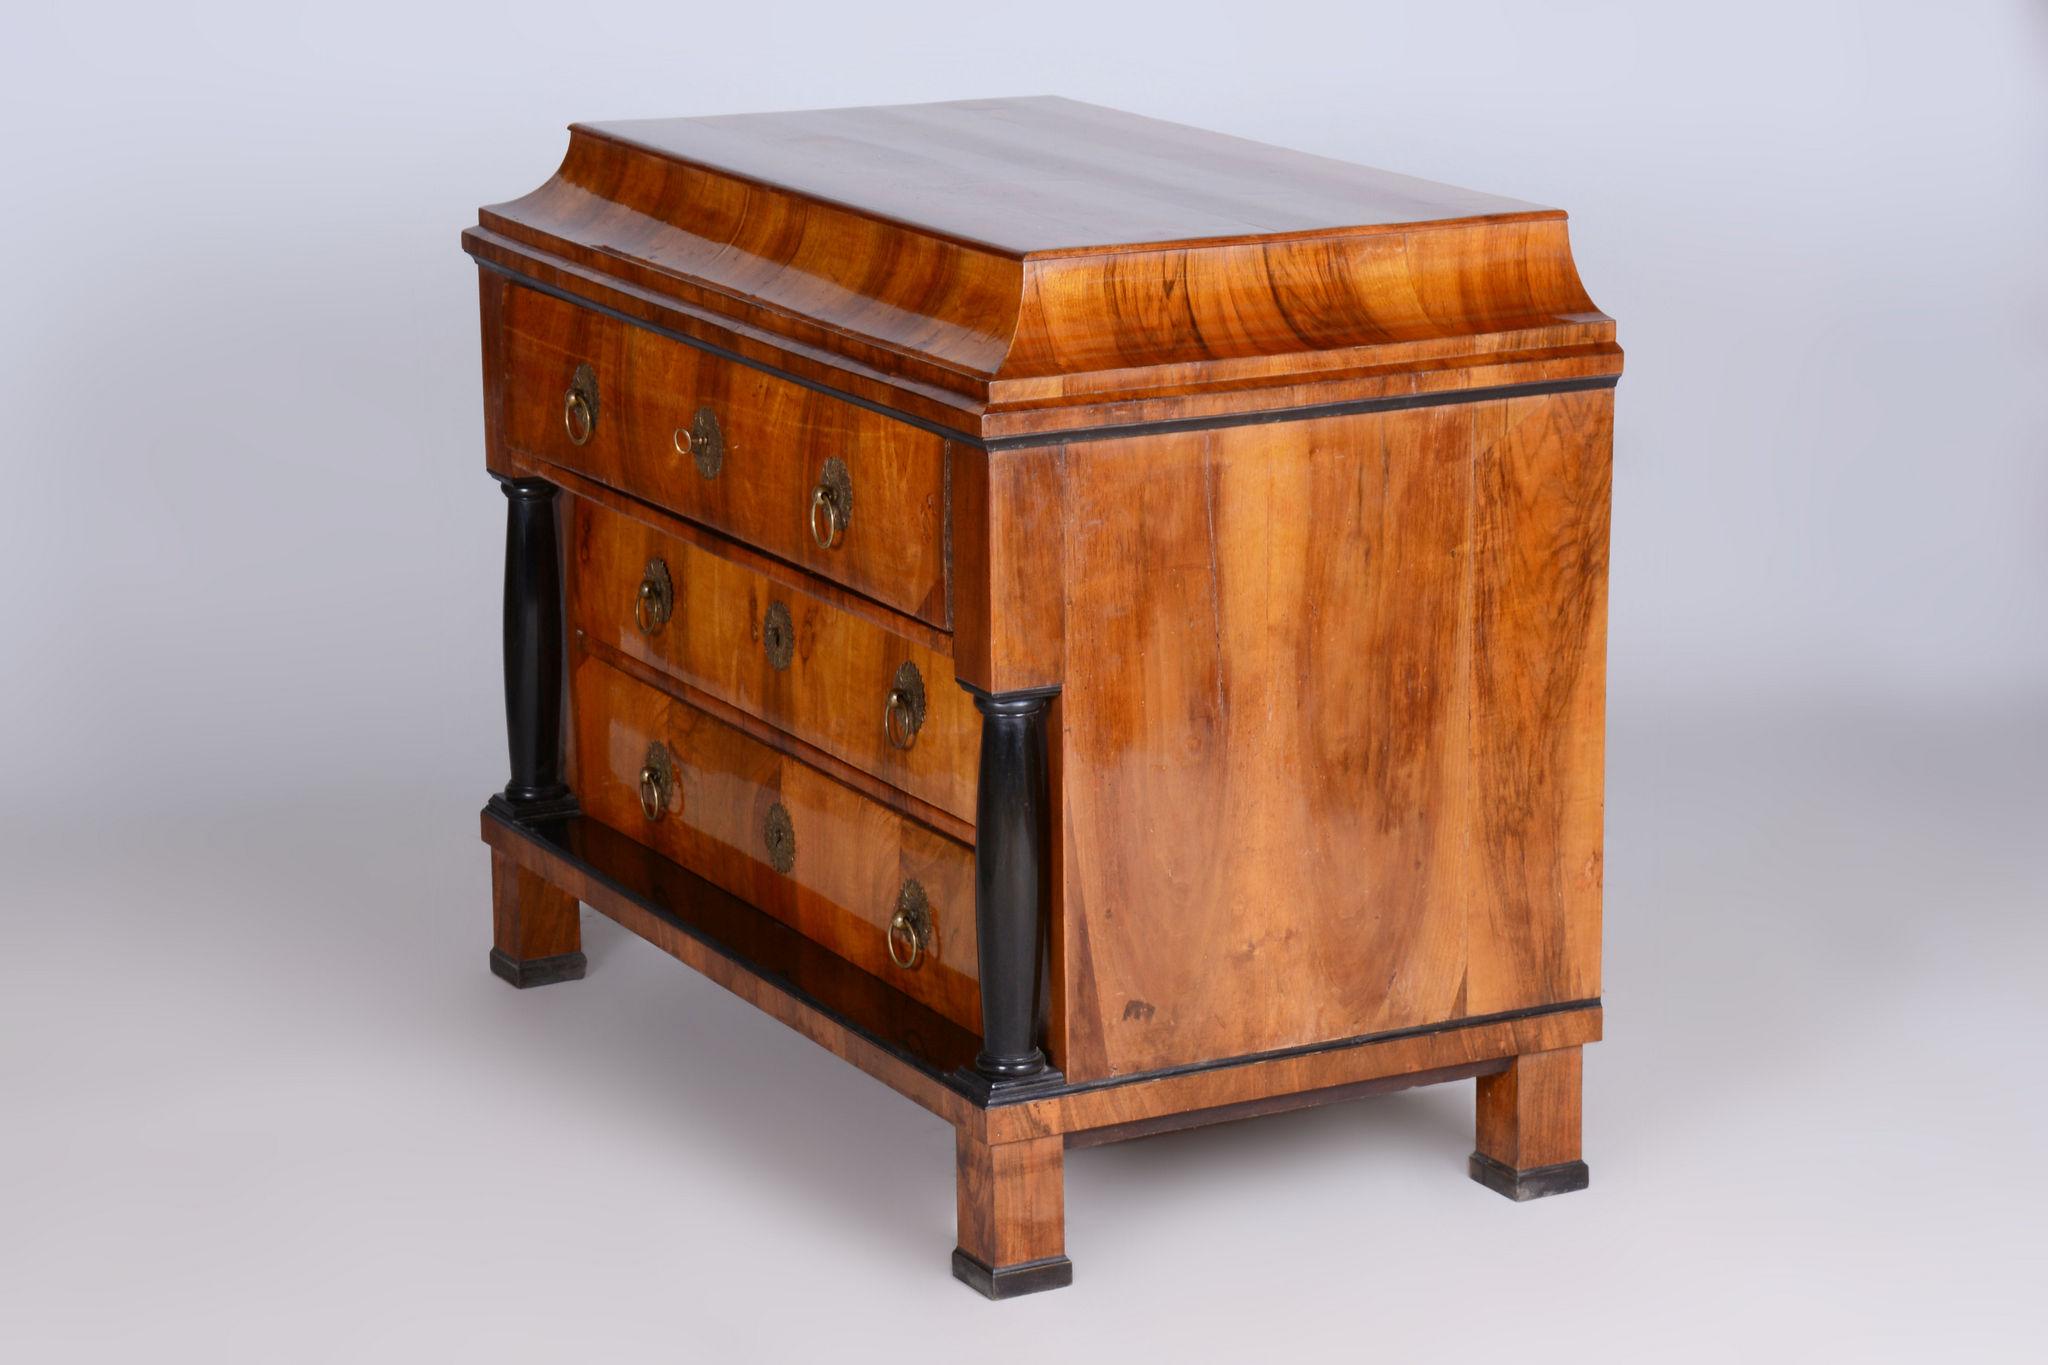 Restored Biedermeier Walnut Chest of Drawers, High Gloss, Czechia, 1820s In Good Condition For Sale In Horomerice, CZ